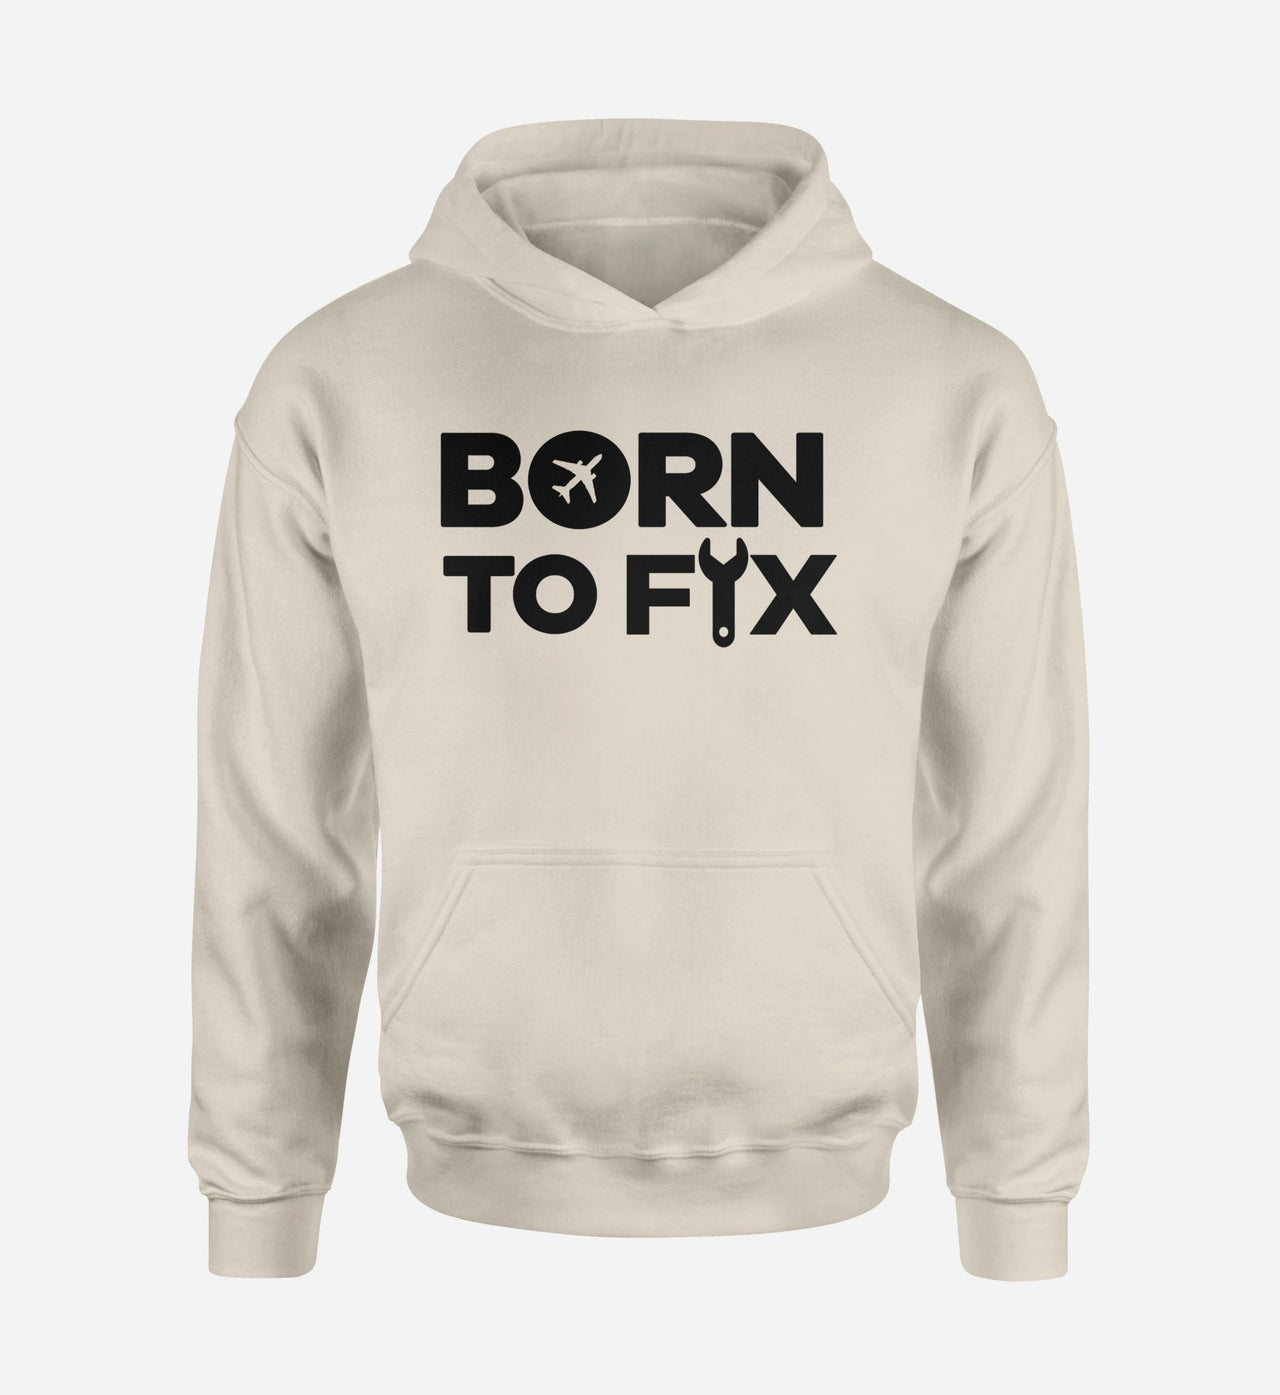 Born To Fix Airplanes Designed Hoodies